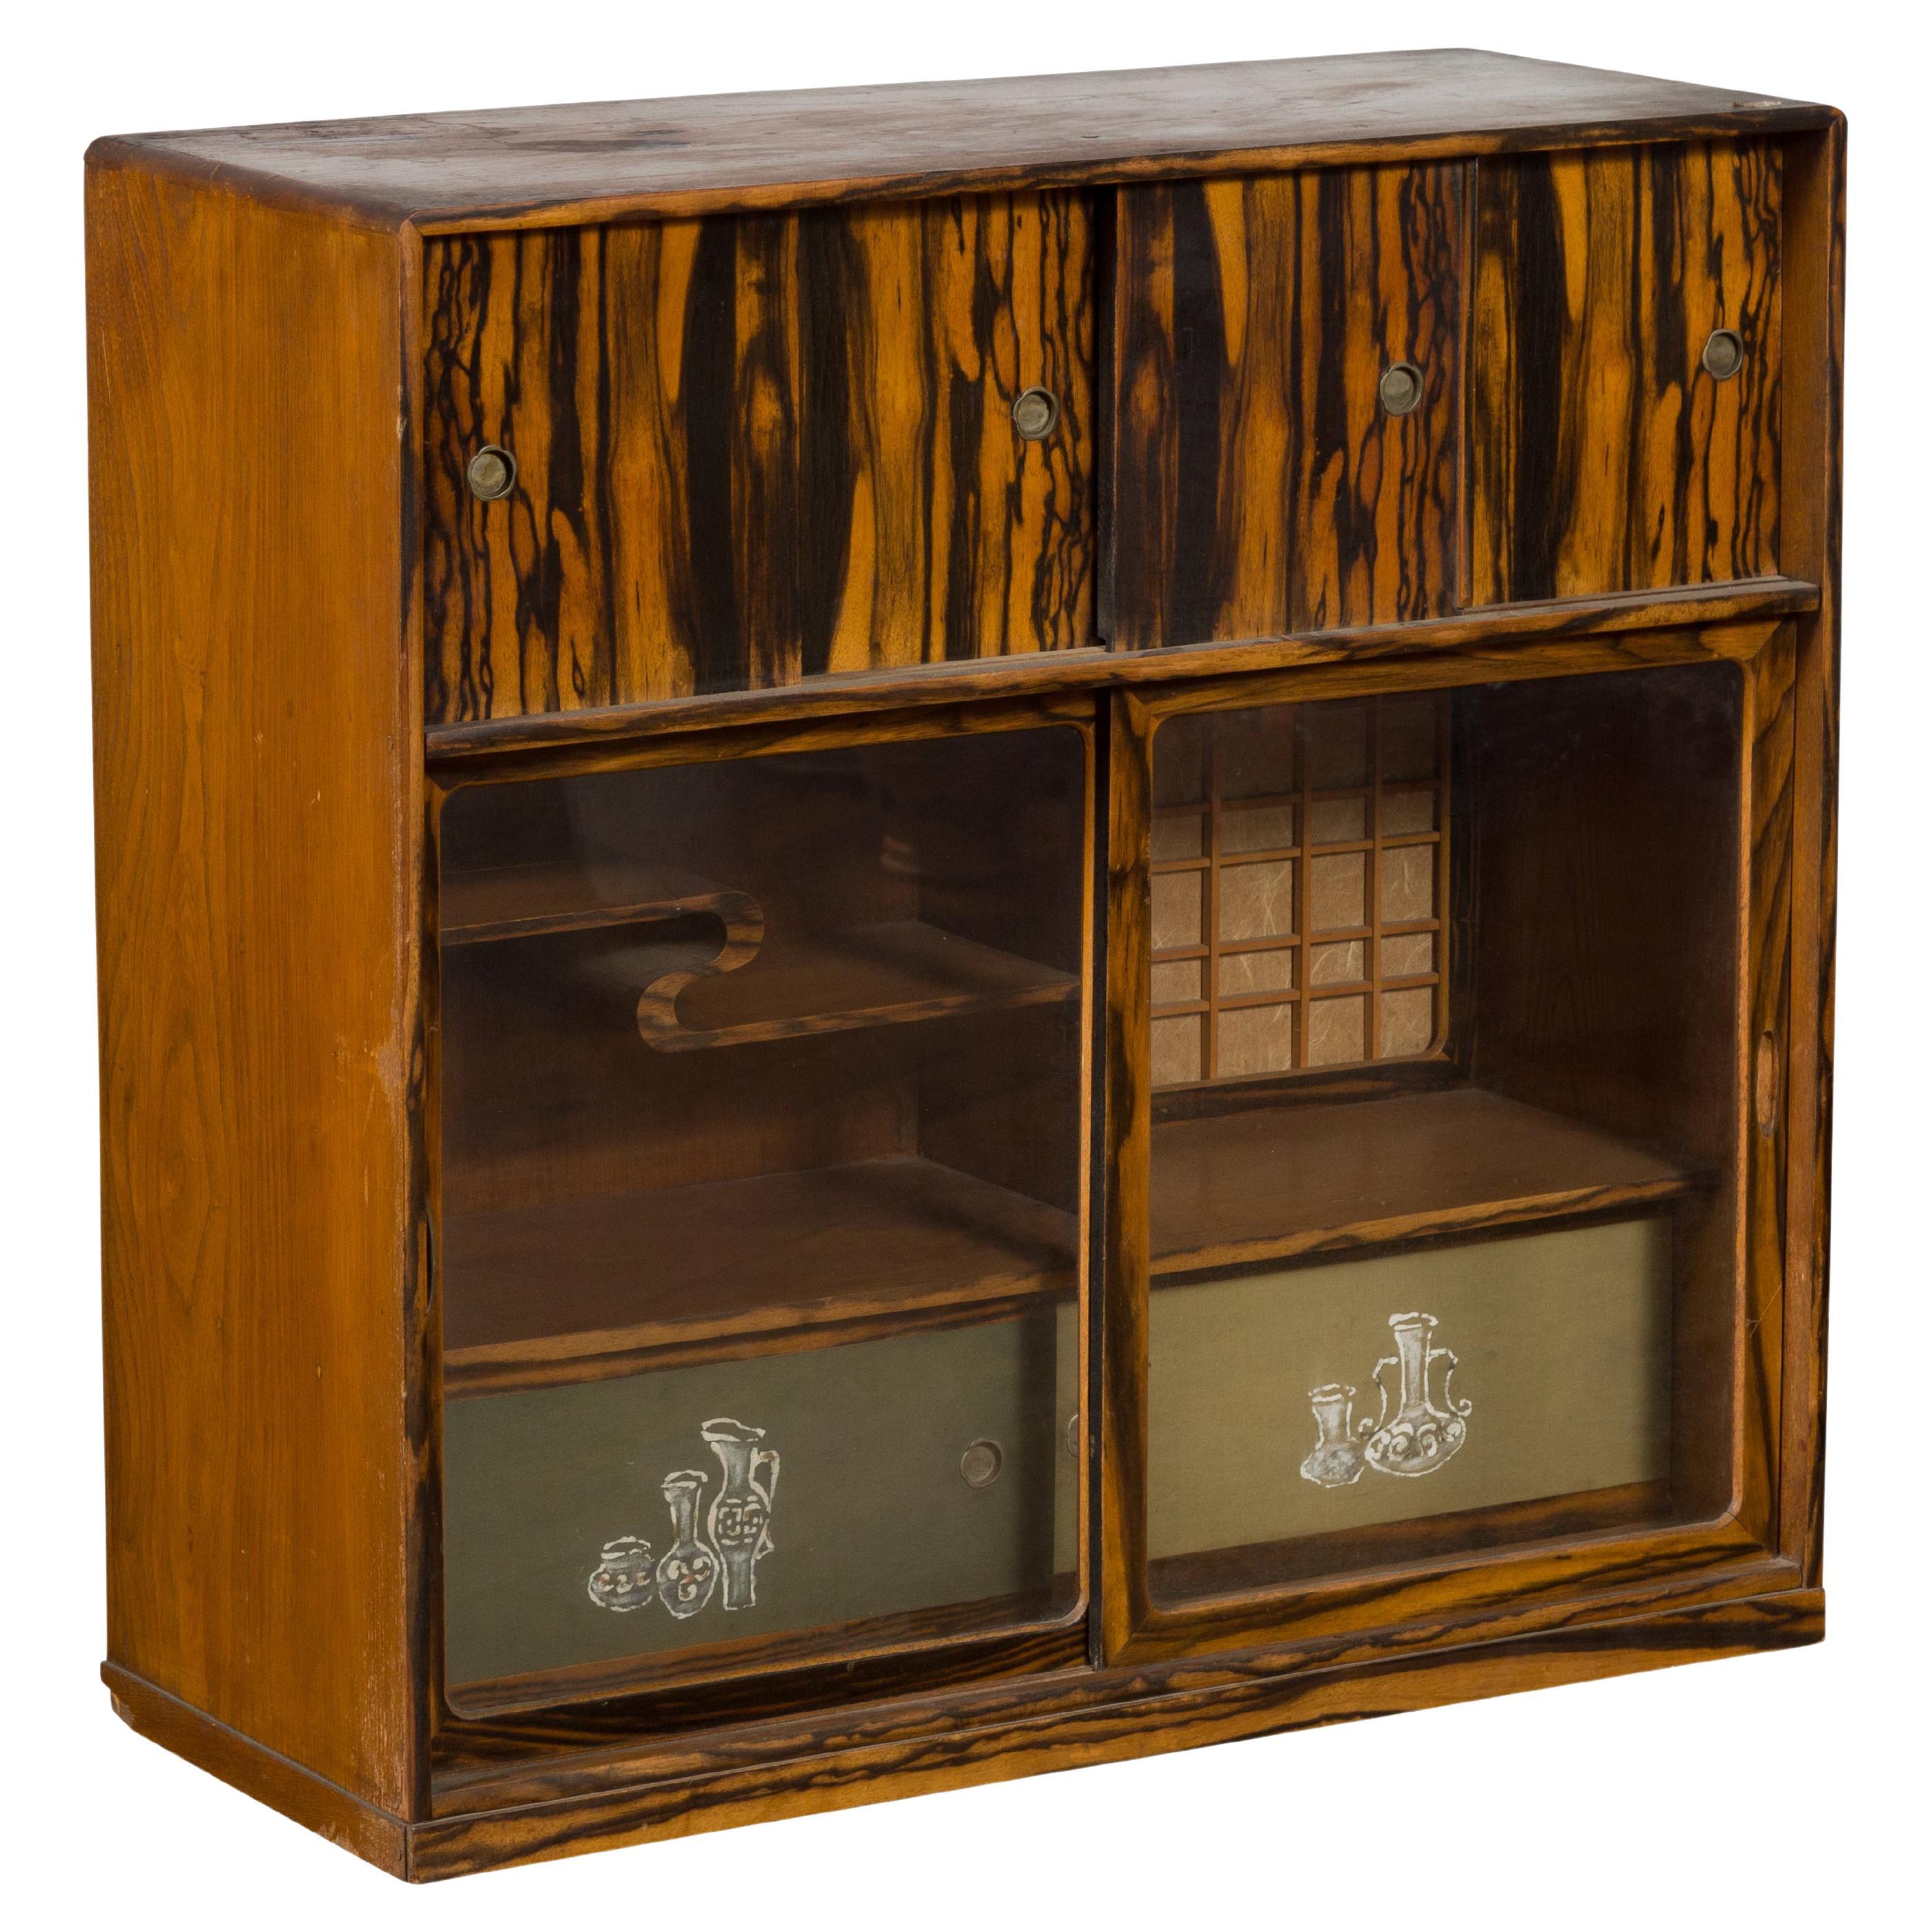 Japanese 19th Century Zebra Wood Tansu Chest with Sliding Doors and Open Shelves For Sale